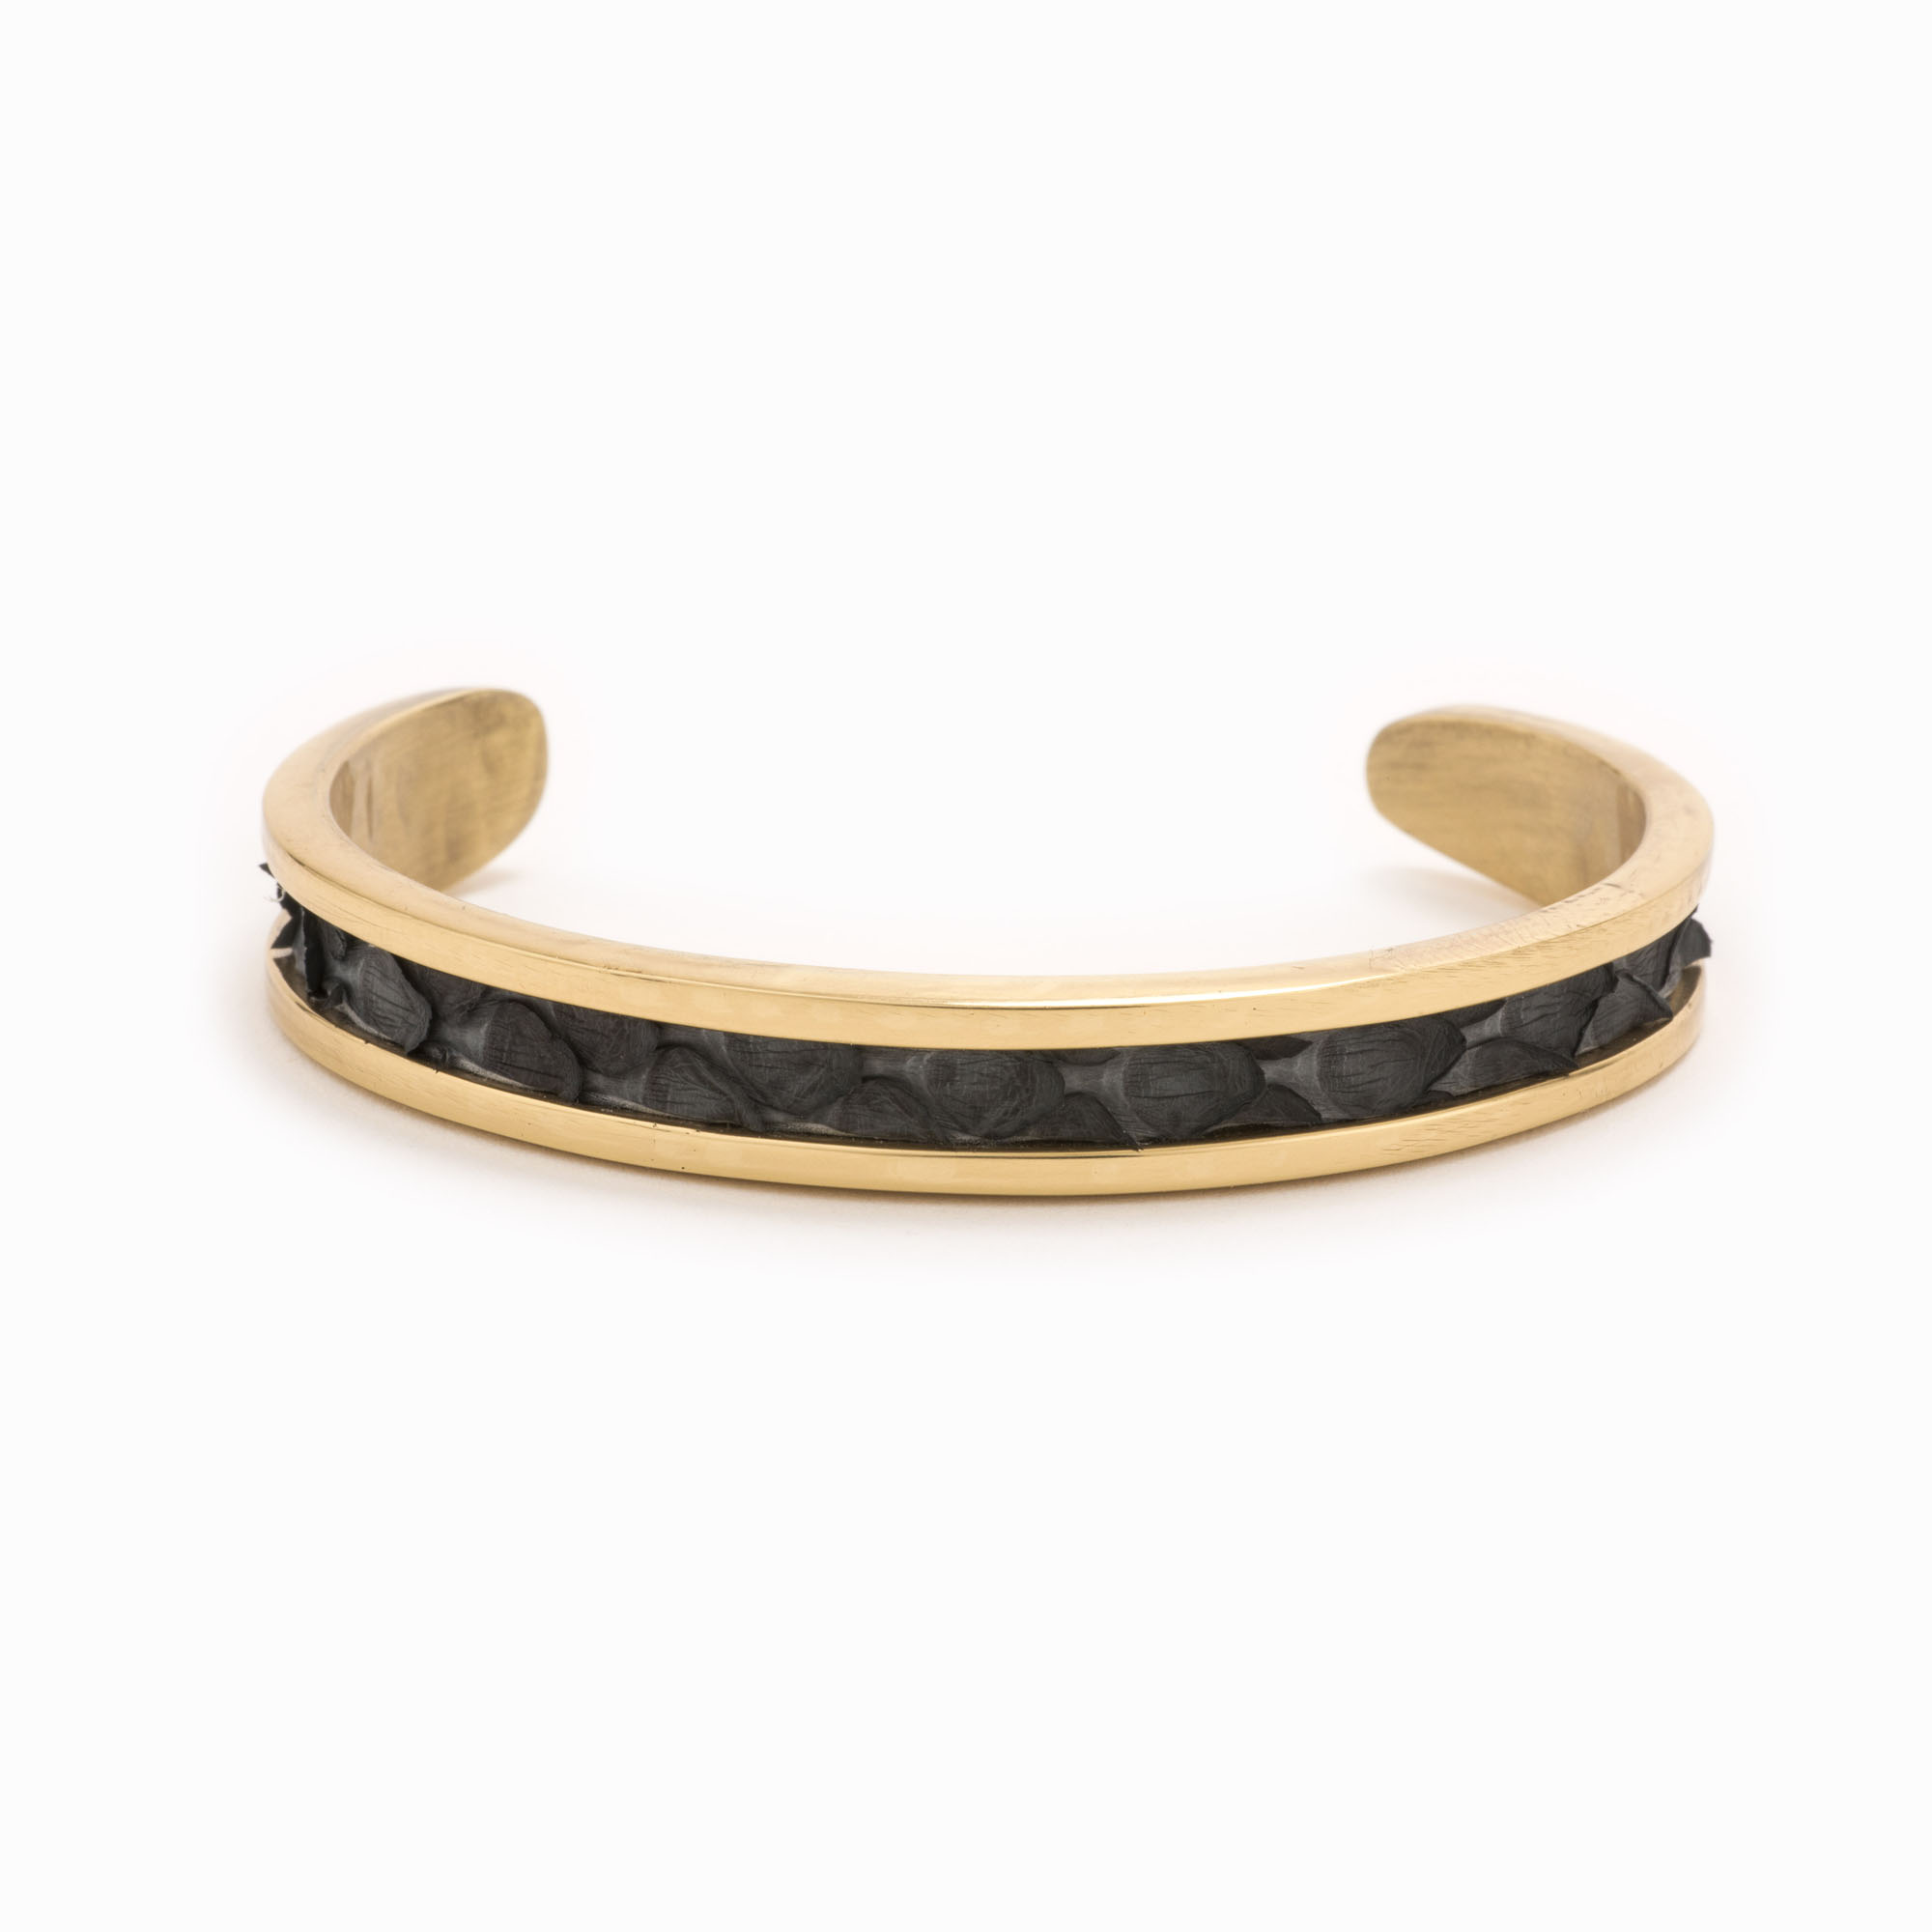 Featured image for “Small Charcoal Gold Cuff”